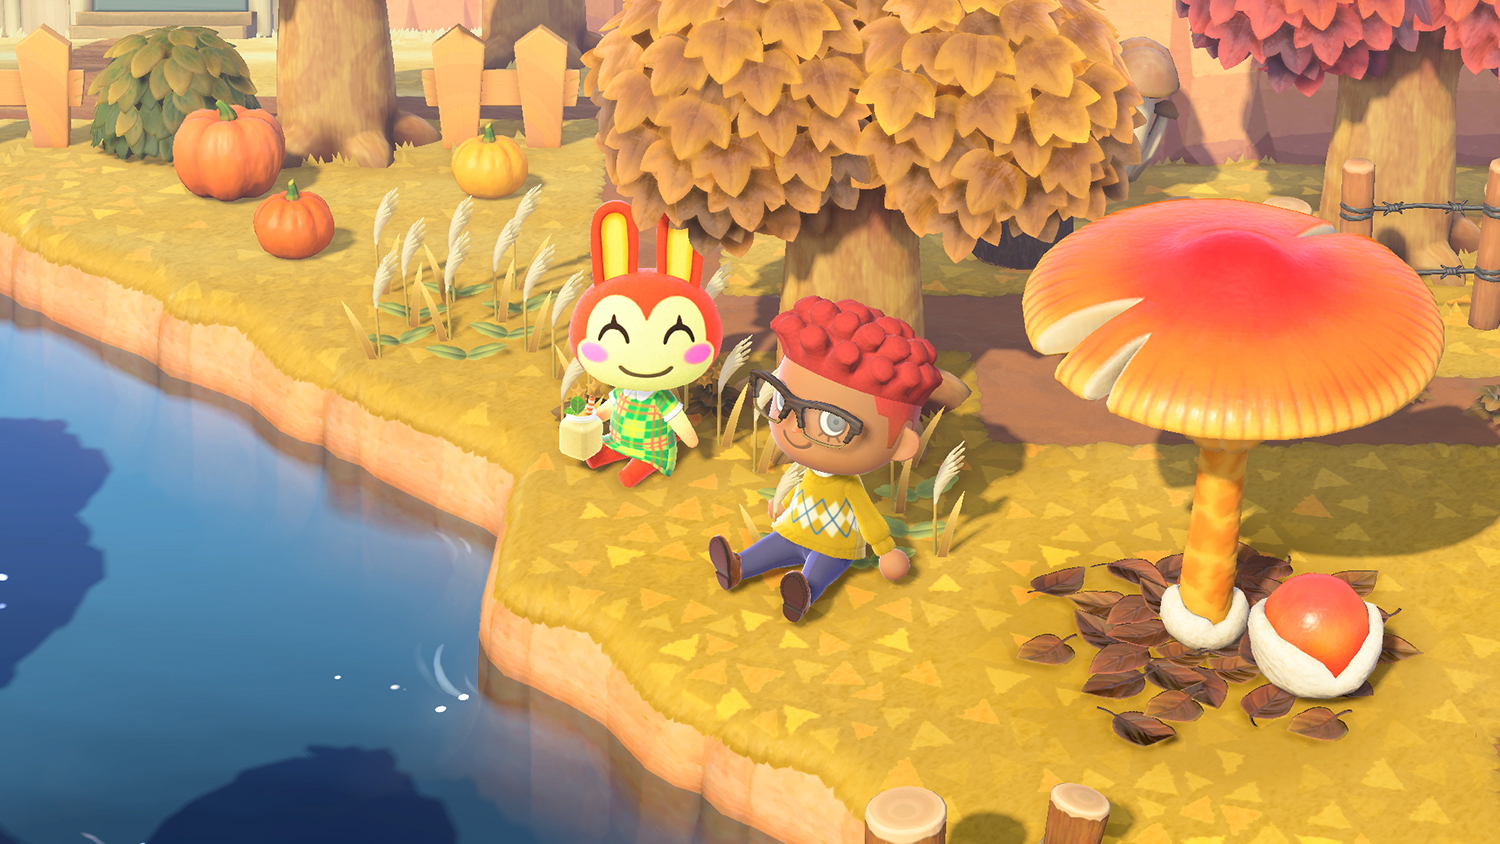 'Animal Crossing: New Horizons' characters sit together in the fall